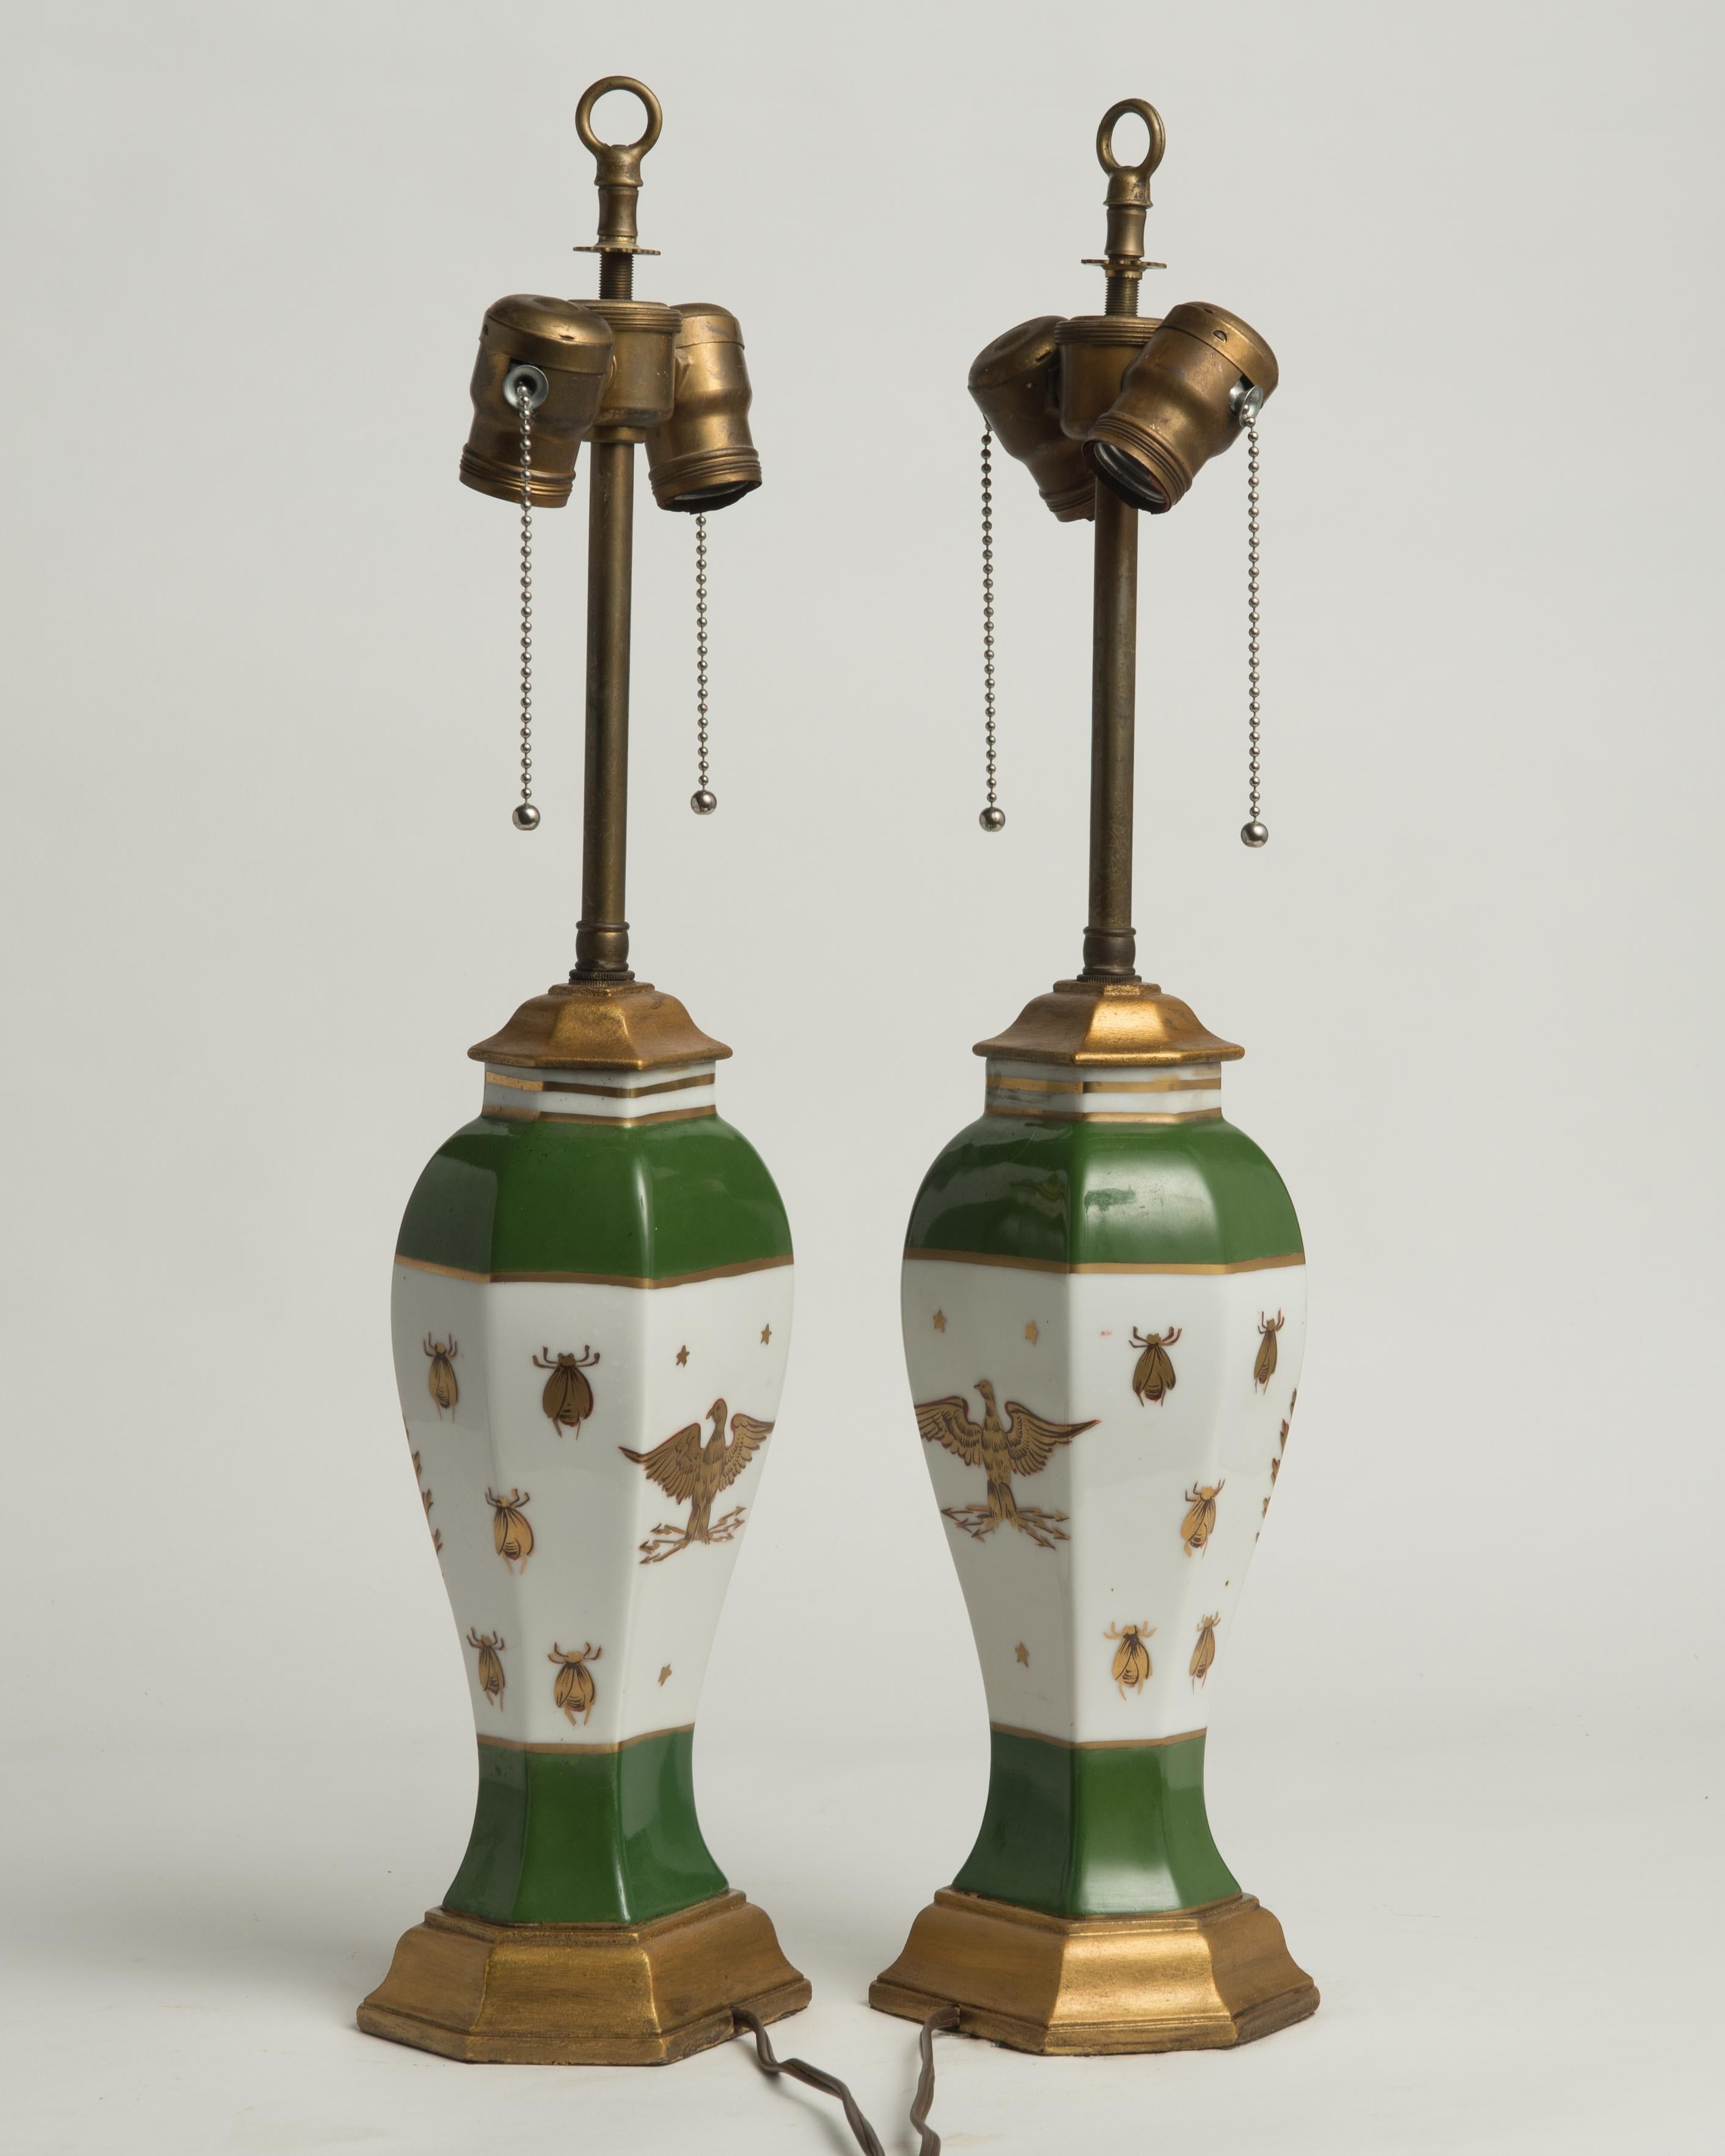 Porcelain Late 19th Century French Napoleonic Lamps Style of Sèvres, a Pair